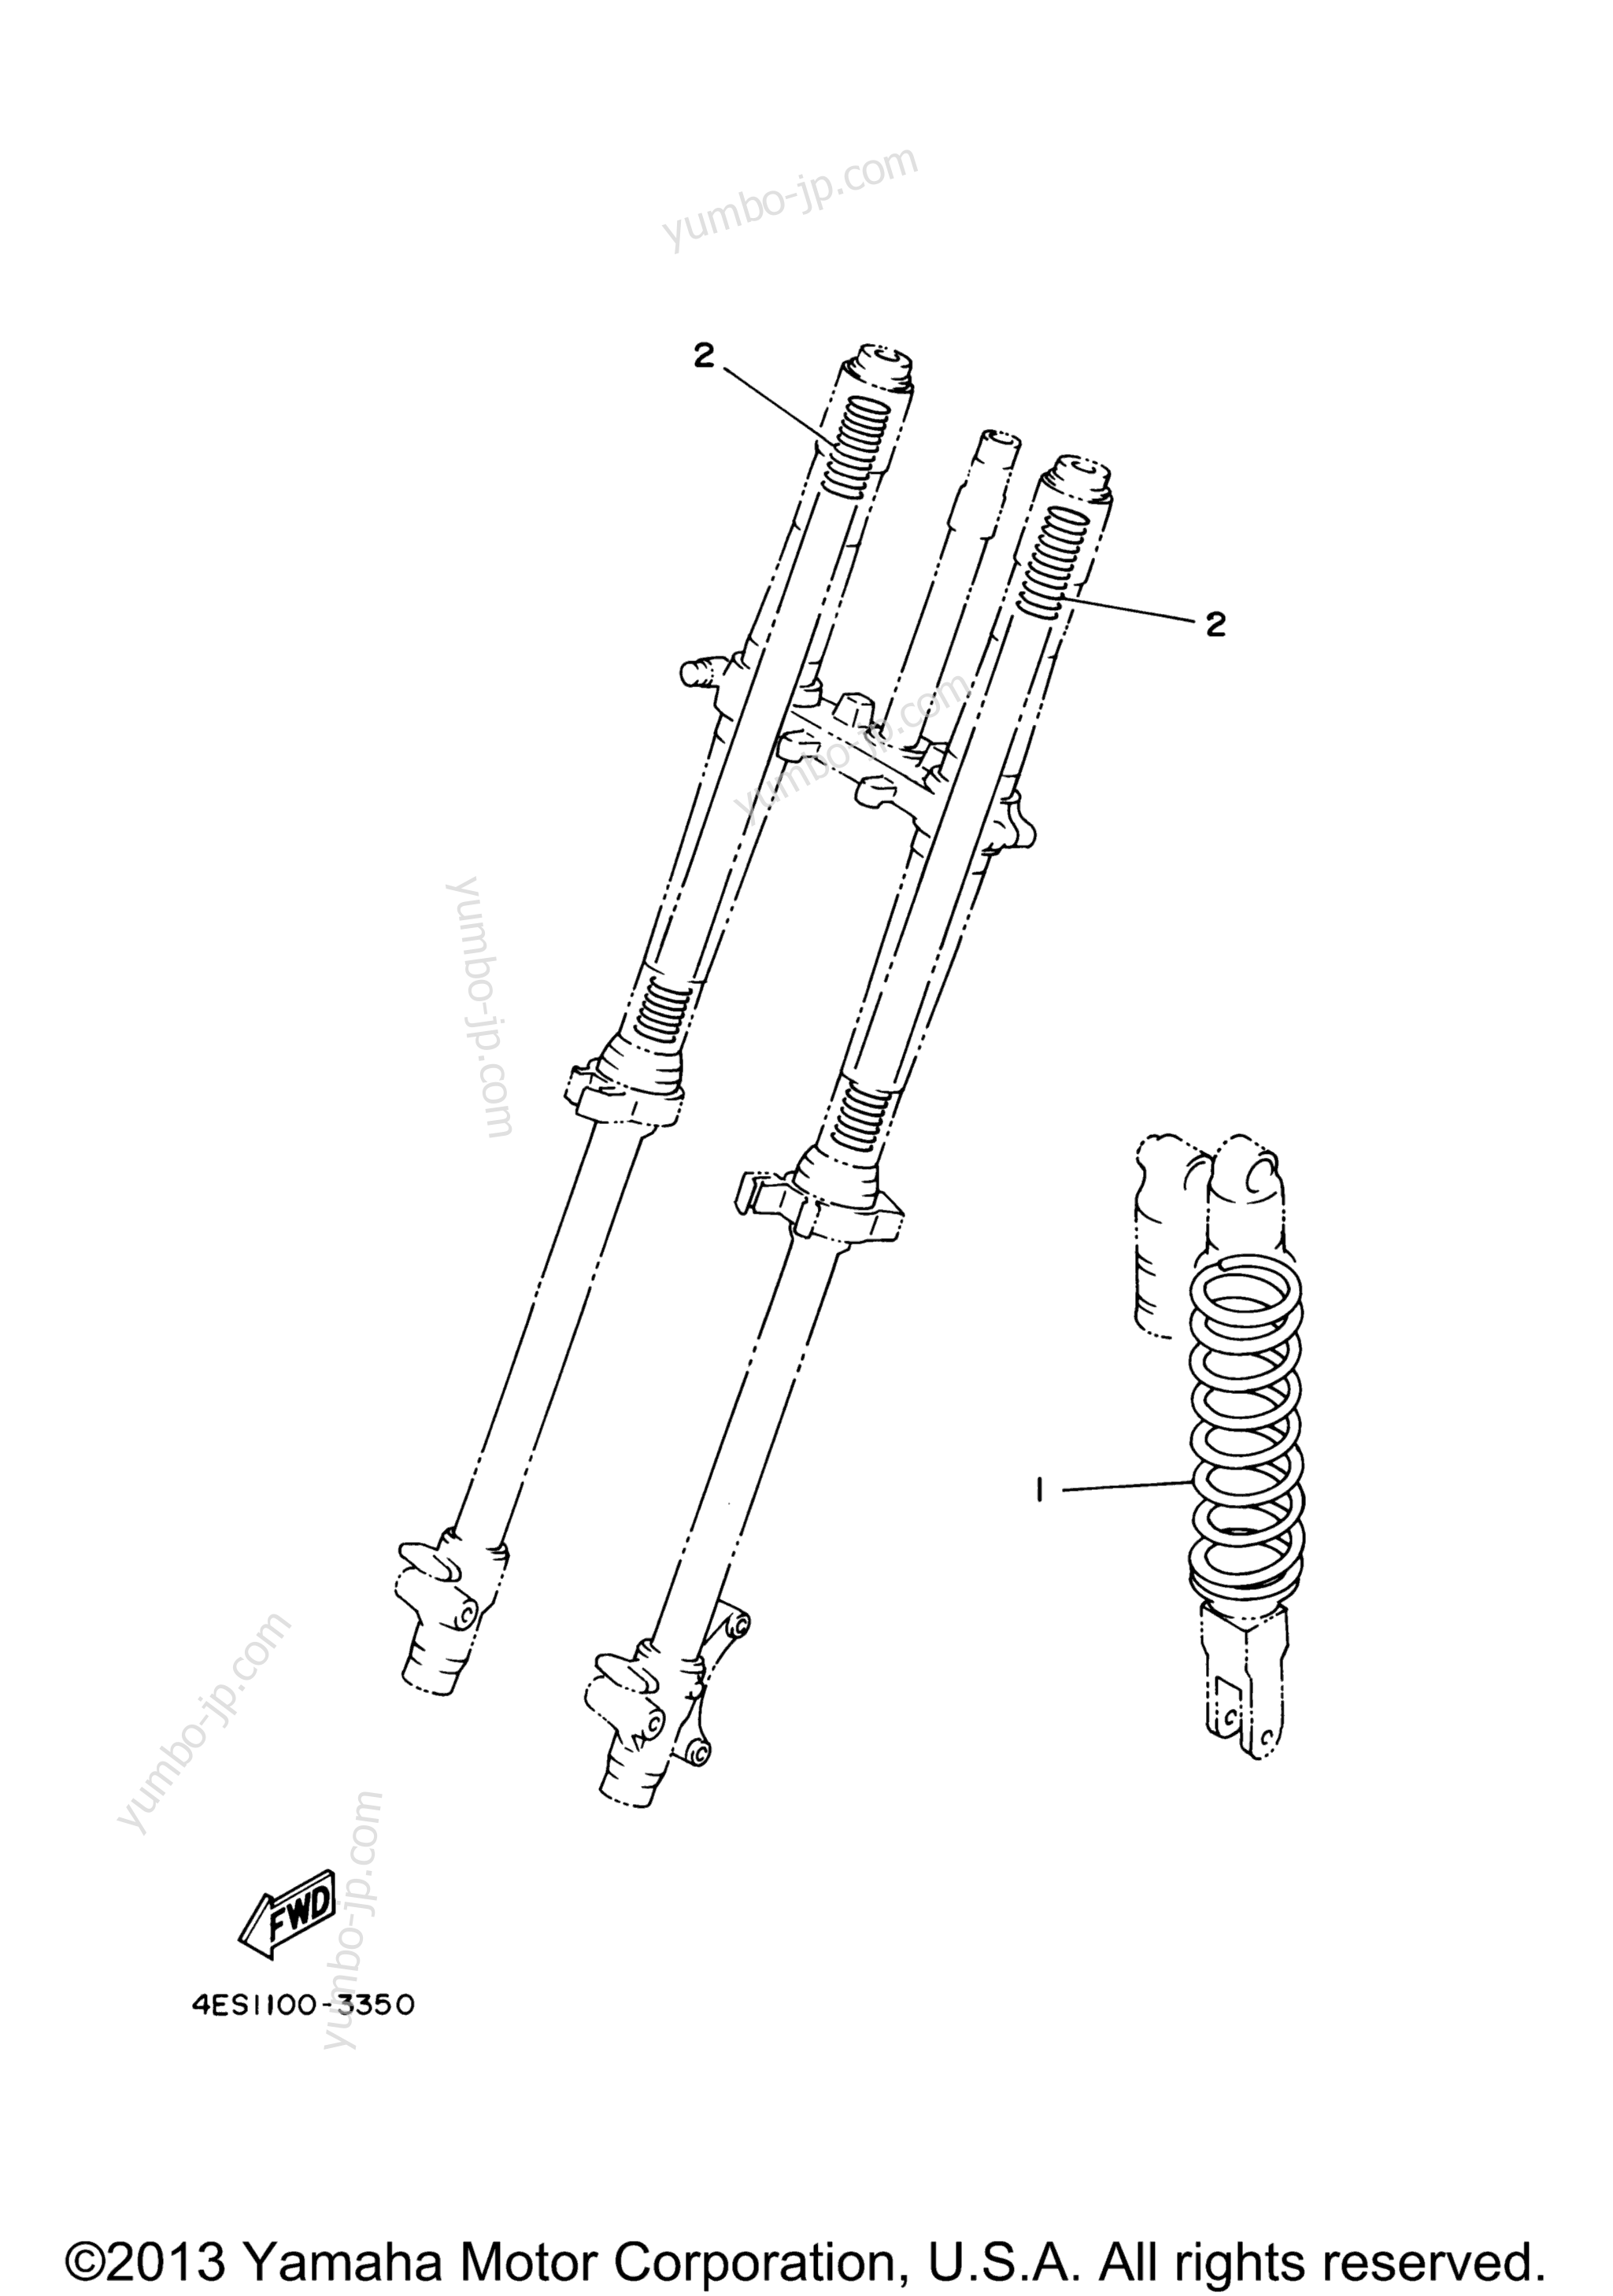 Alternate For Chassis for motorcycles YAMAHA YZ85 (YZ85Z) 2010 year